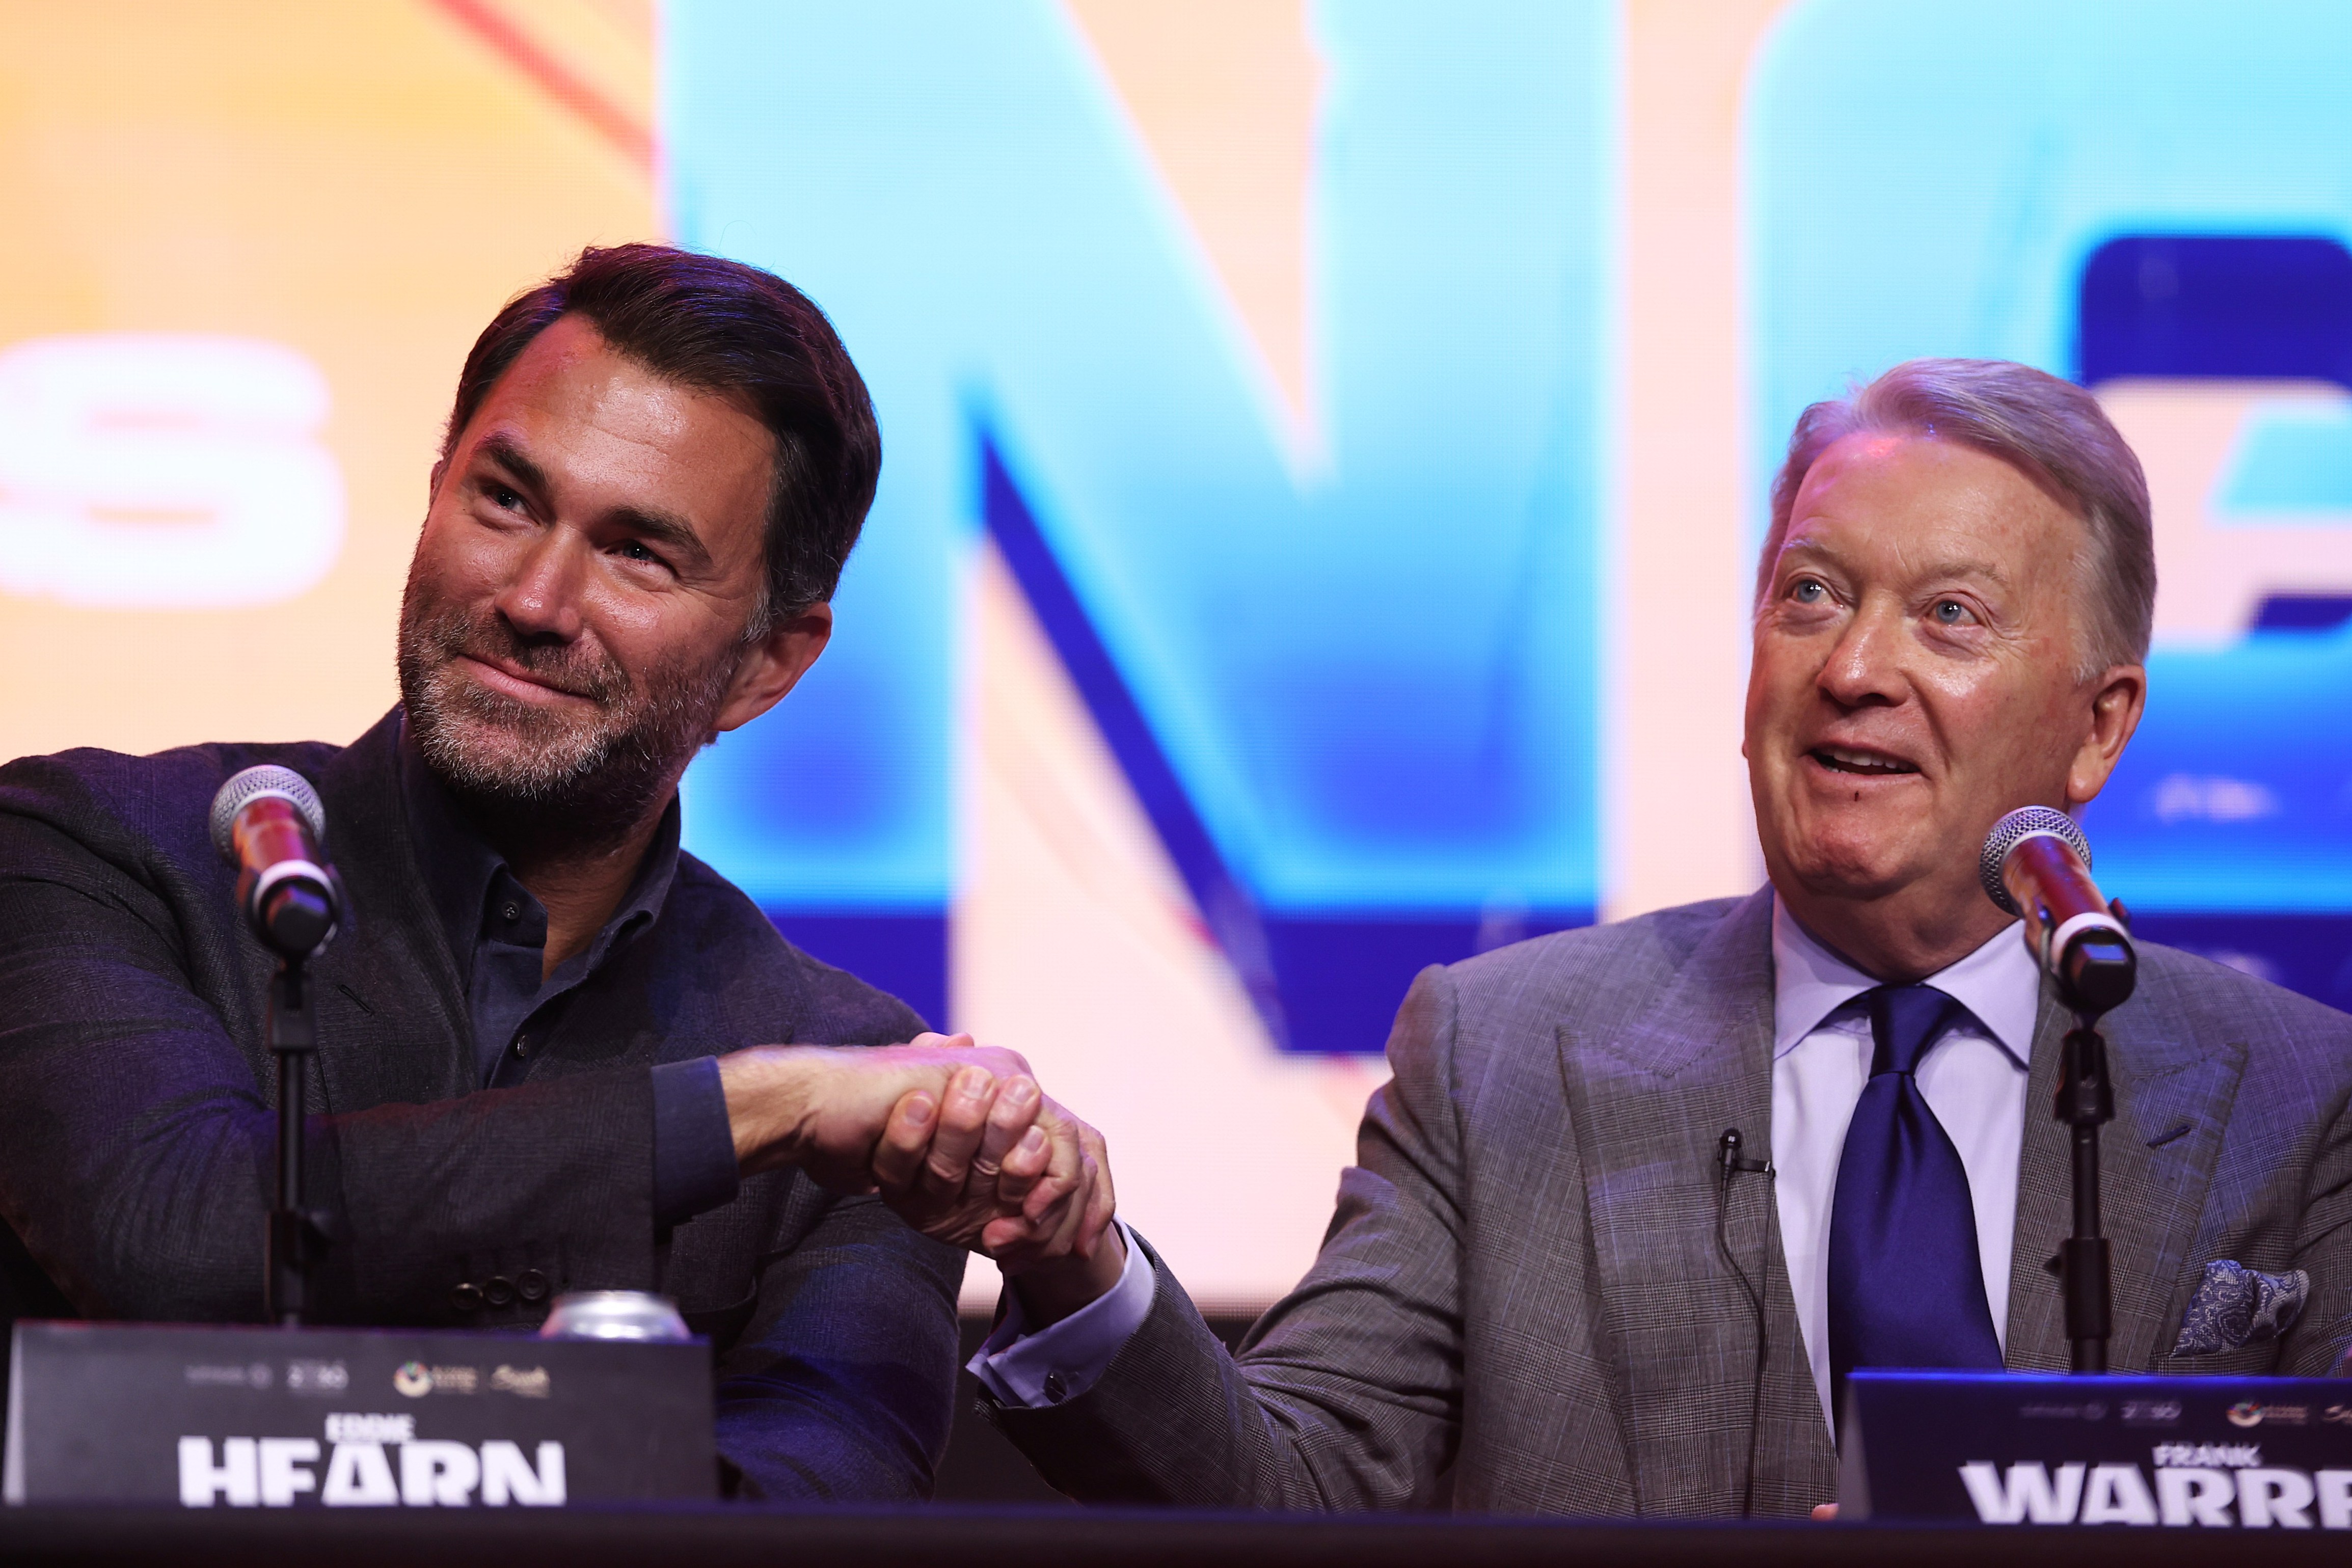 Bitter rivals Hearn and Warren on verge of joining forces